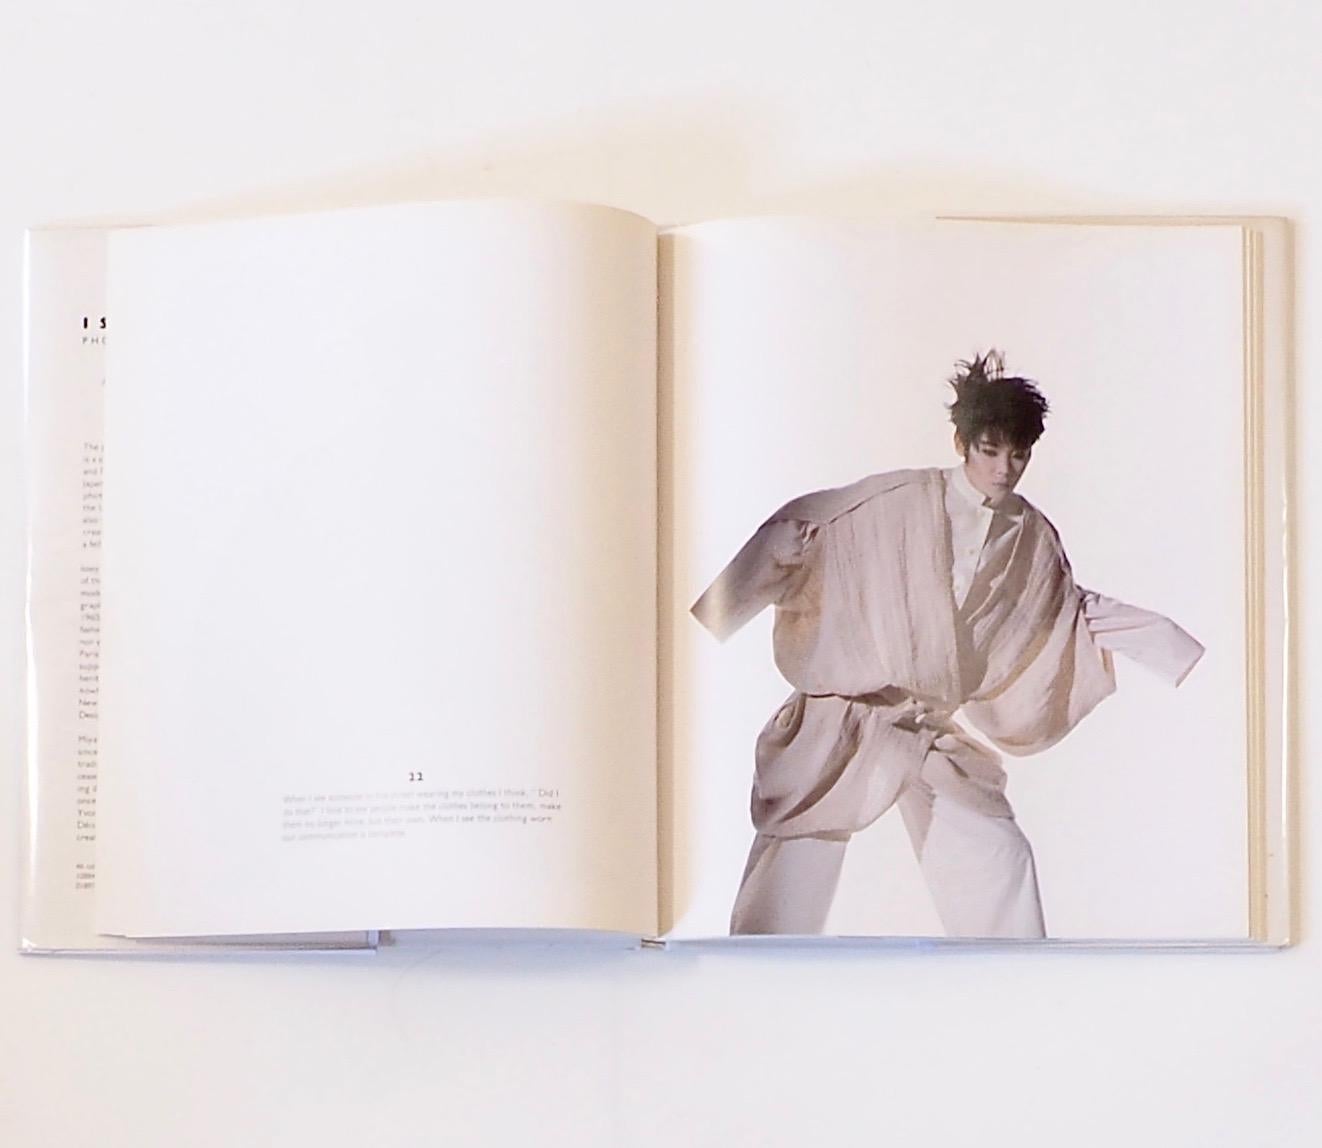 Issey Miyake: Photographs by Irving Penn
Published by New York Graphic society, 1988. First Edition.

By one of the greatest photographers in the history of fashion in collaboration with one the great designers, this rare book captured the essence